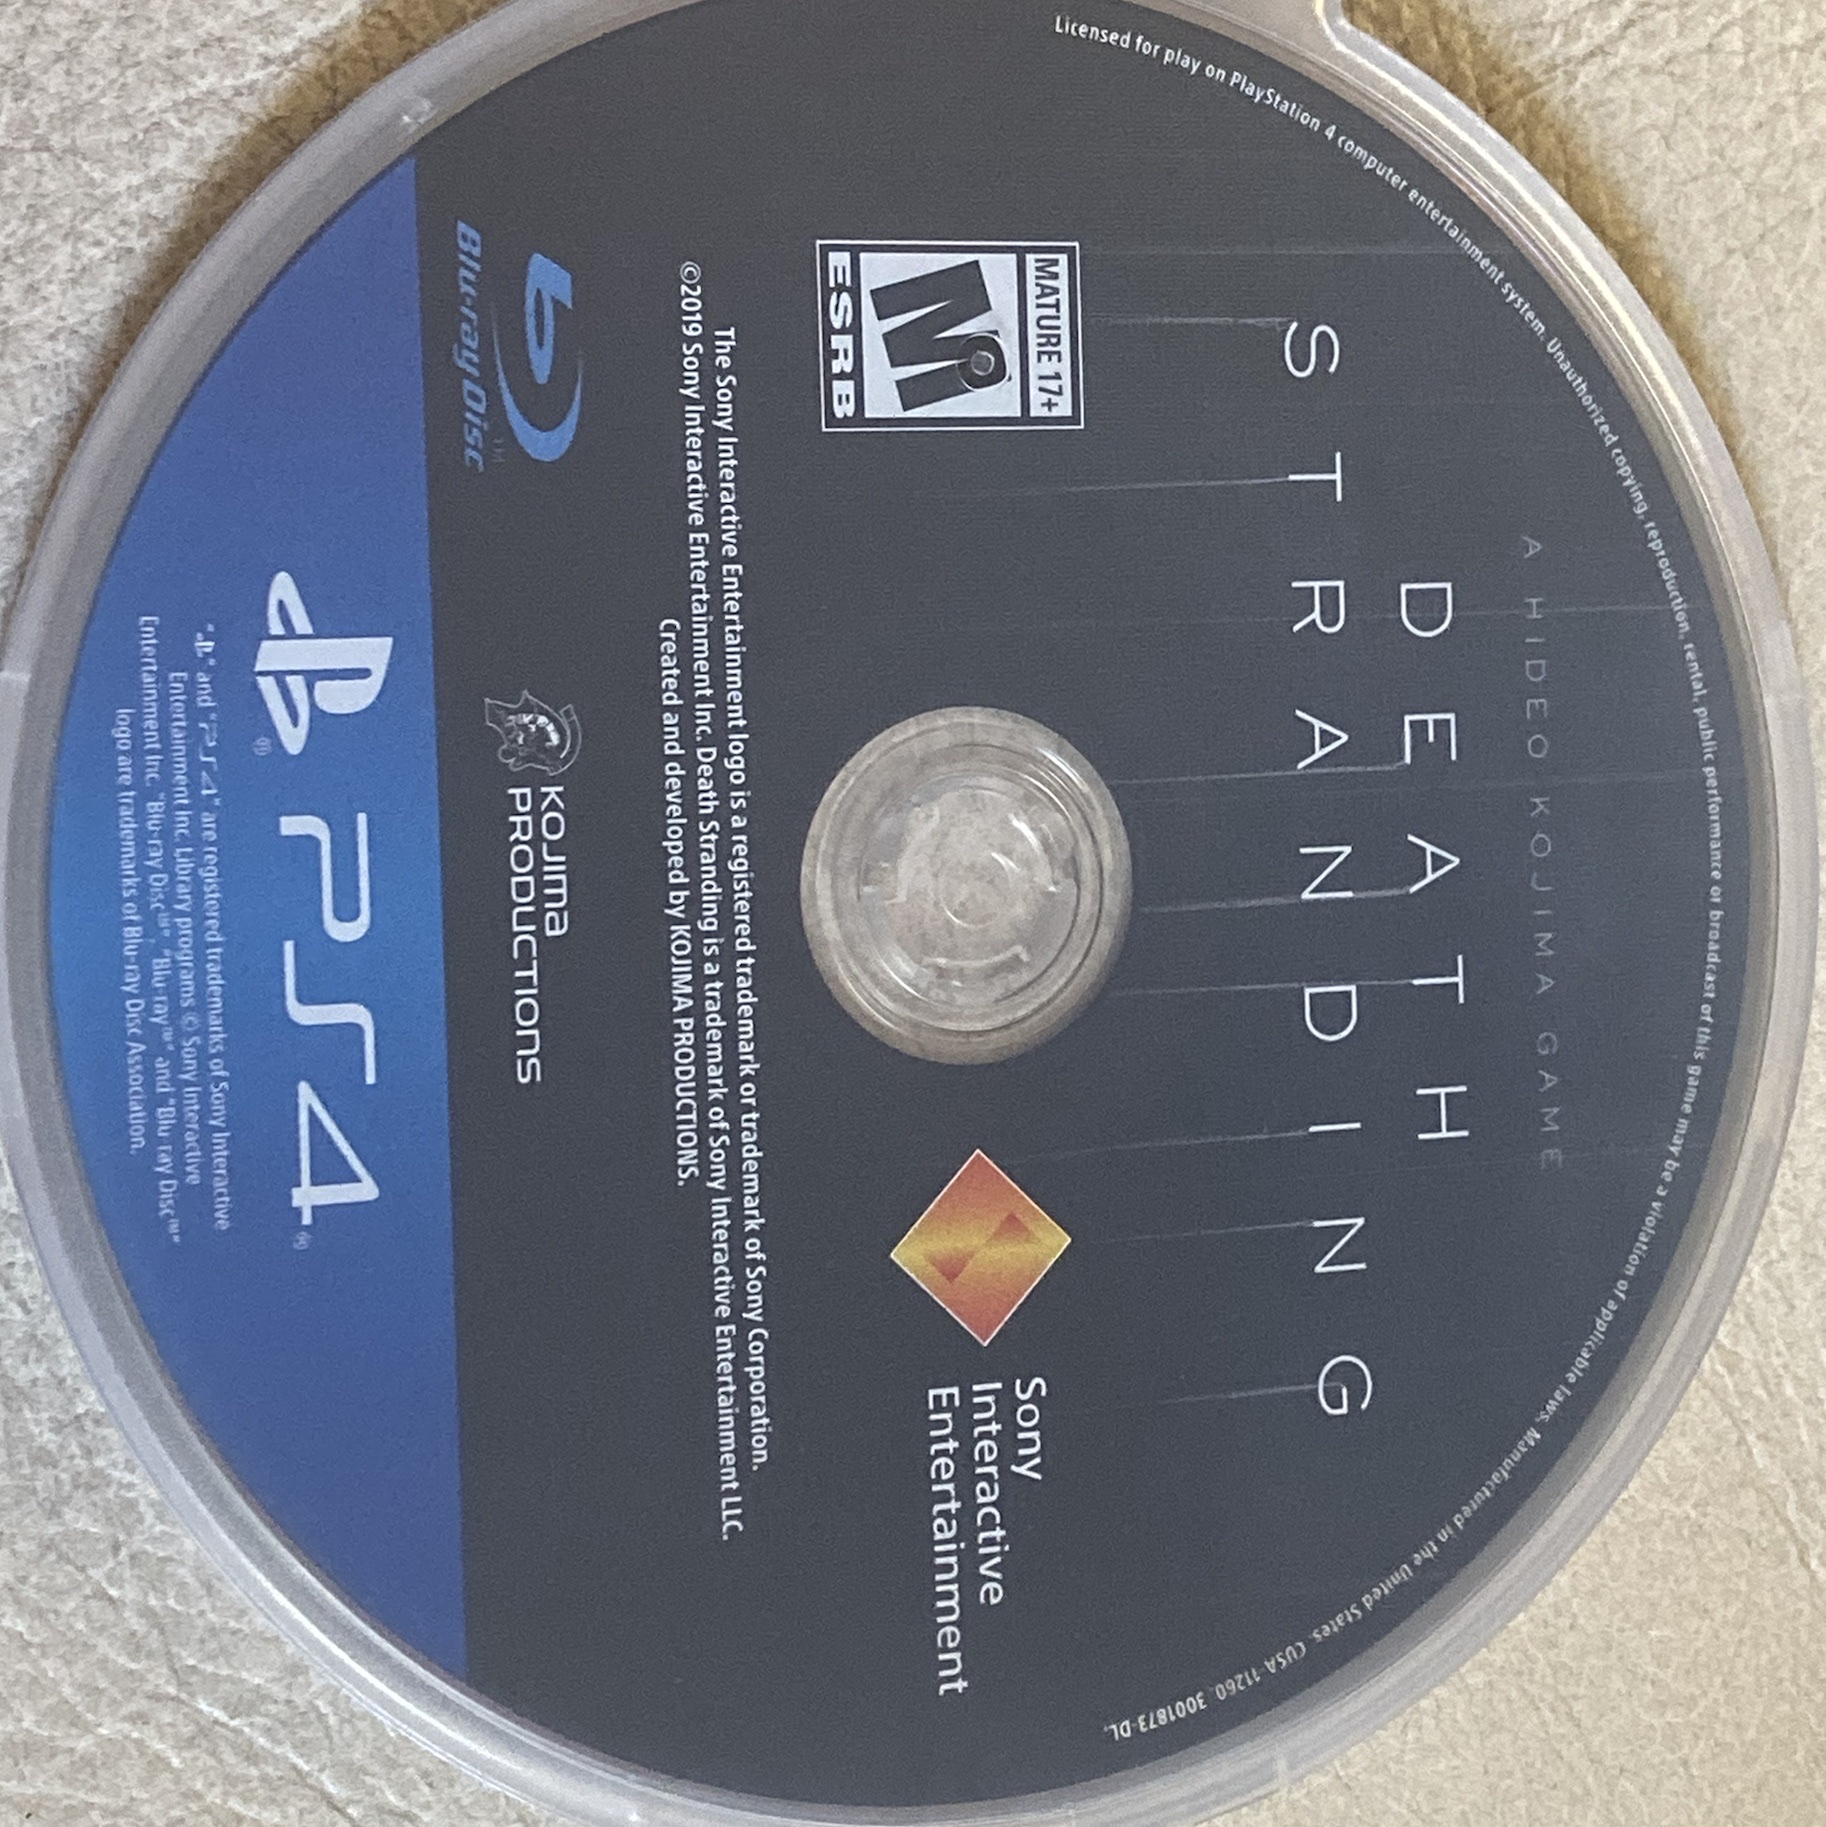 Death Stranding Disc Only Ps4 Games Like New Gameflip - ps4 roblox game disc